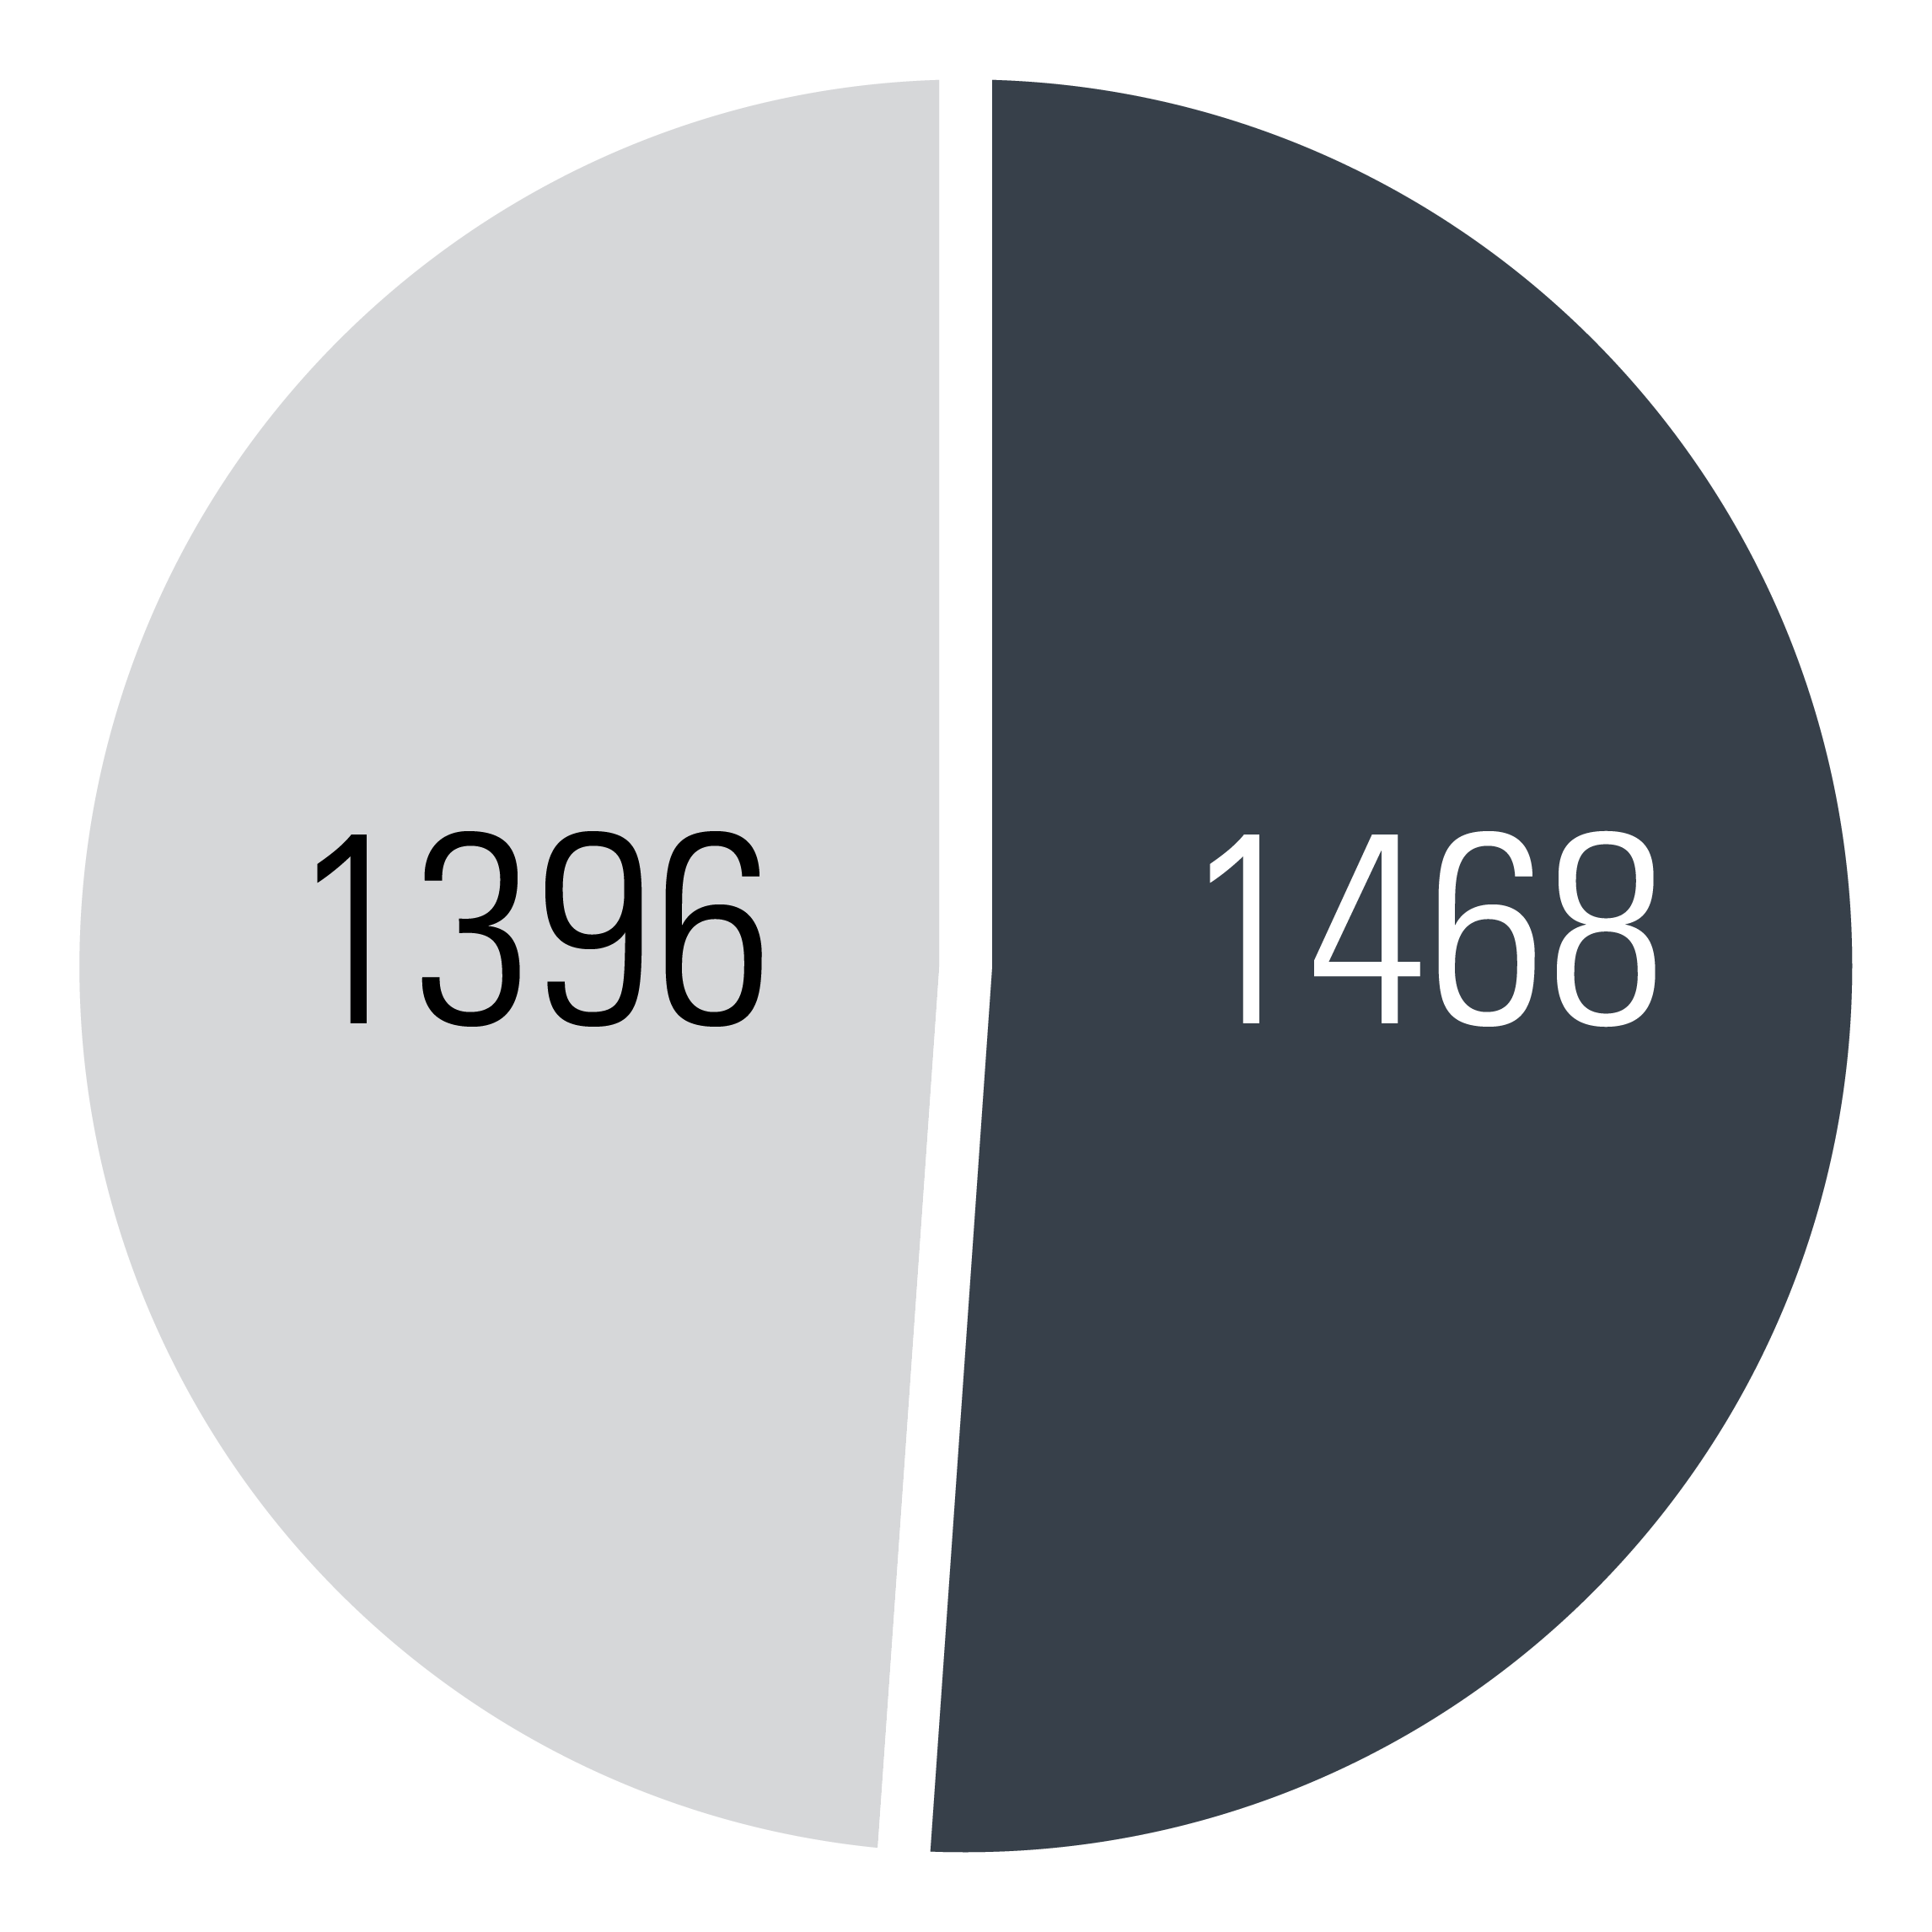 Number of Participants